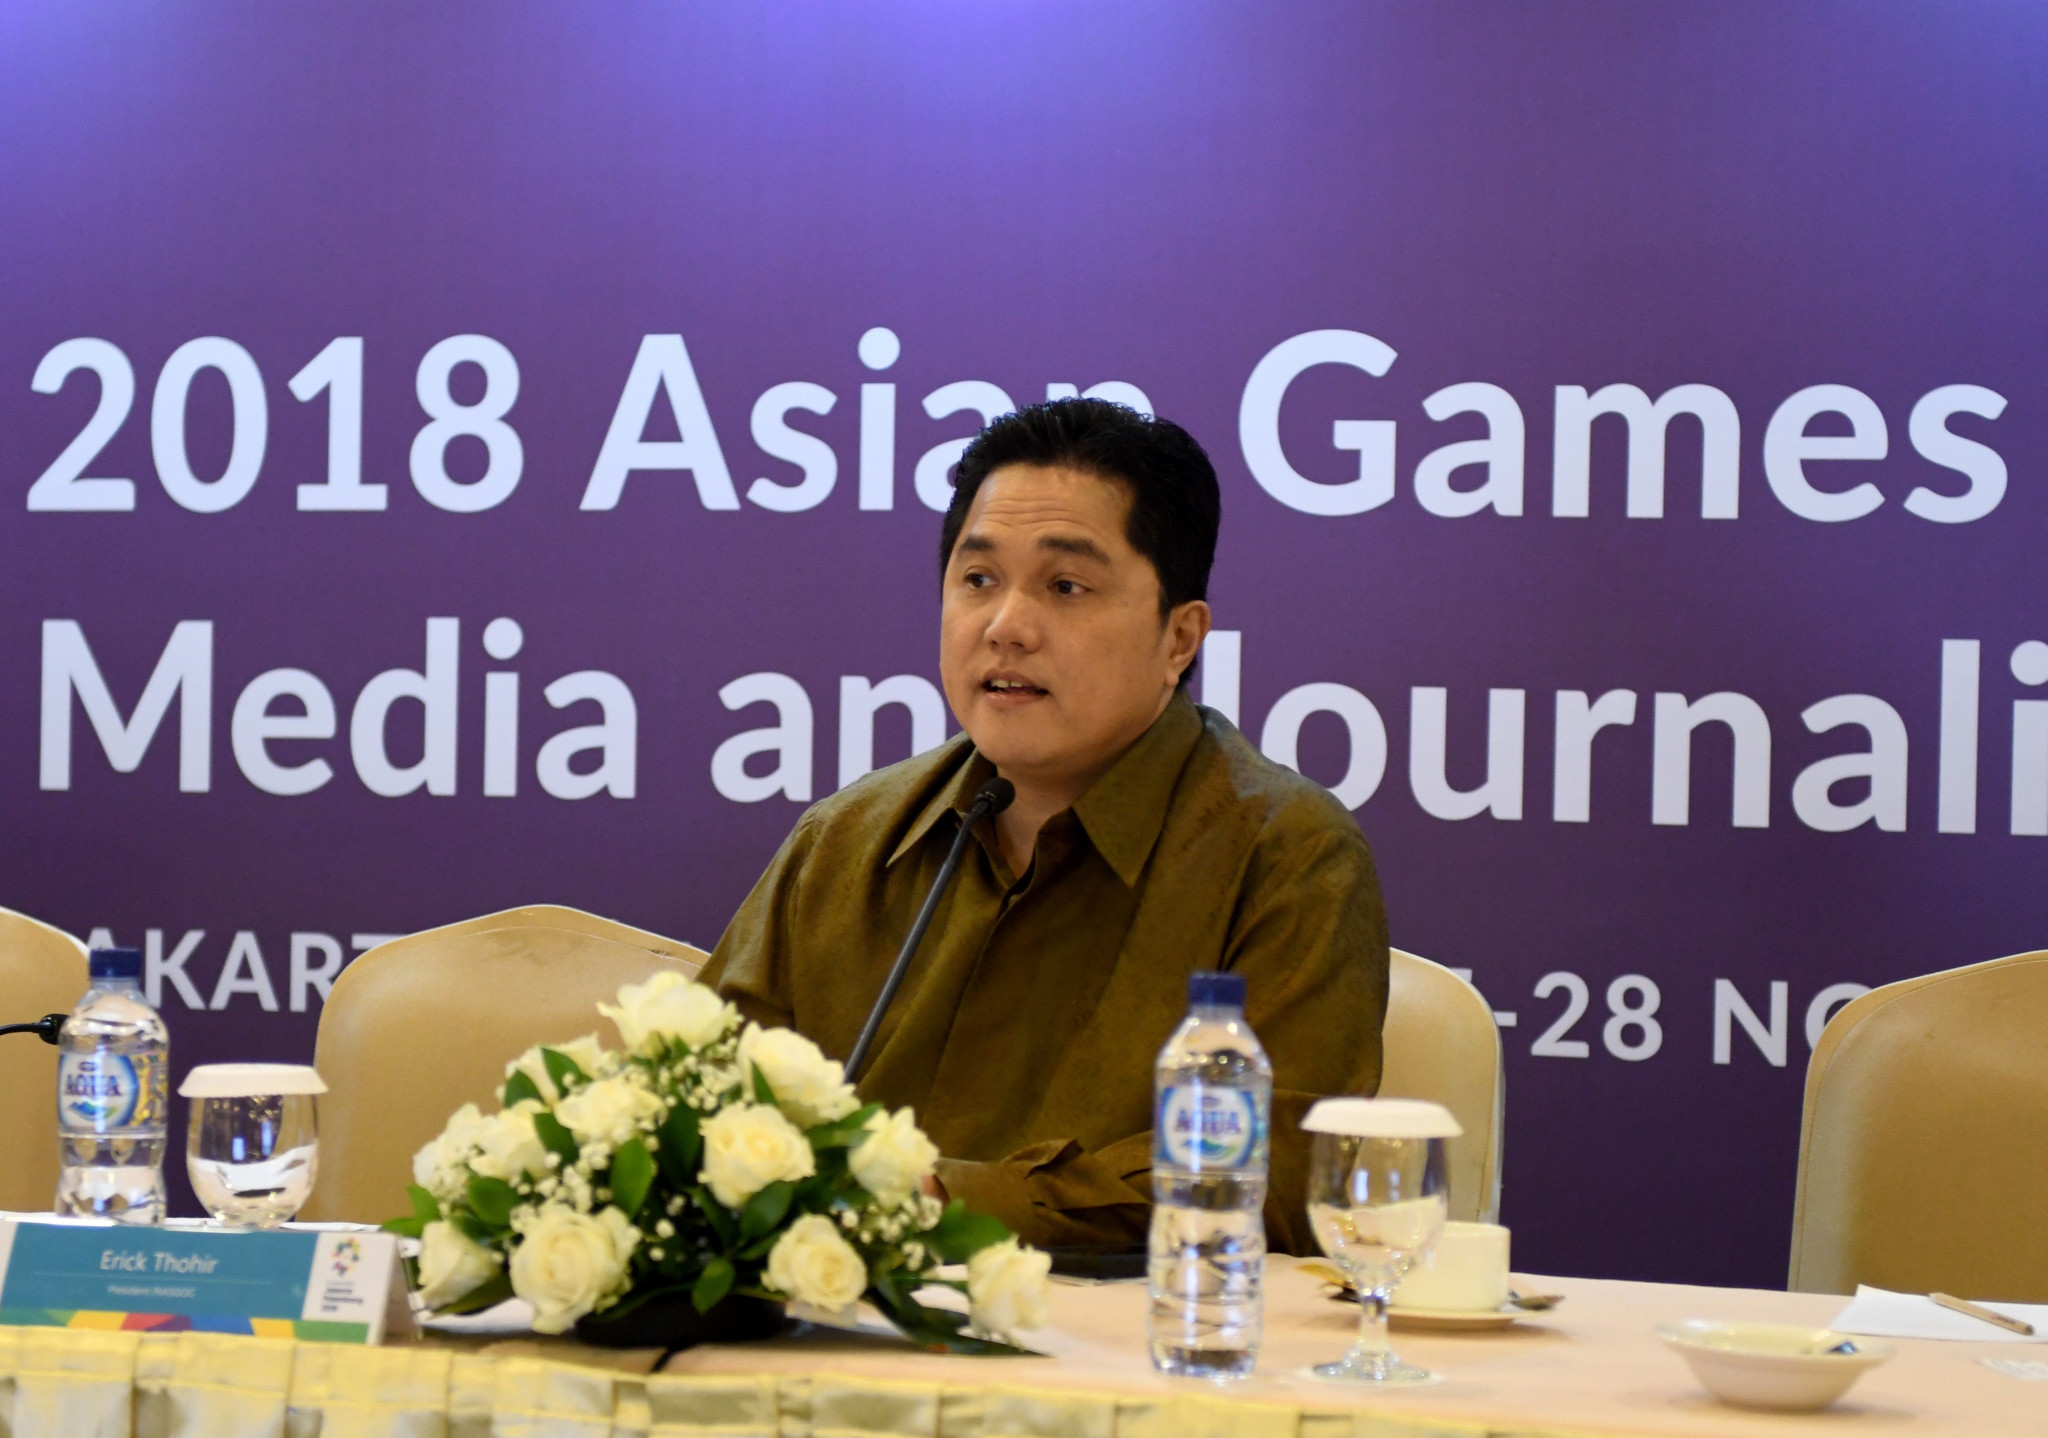 Indonesia wants to host 2032 Olympic Games, Jakarta Palembang 2018 President claims